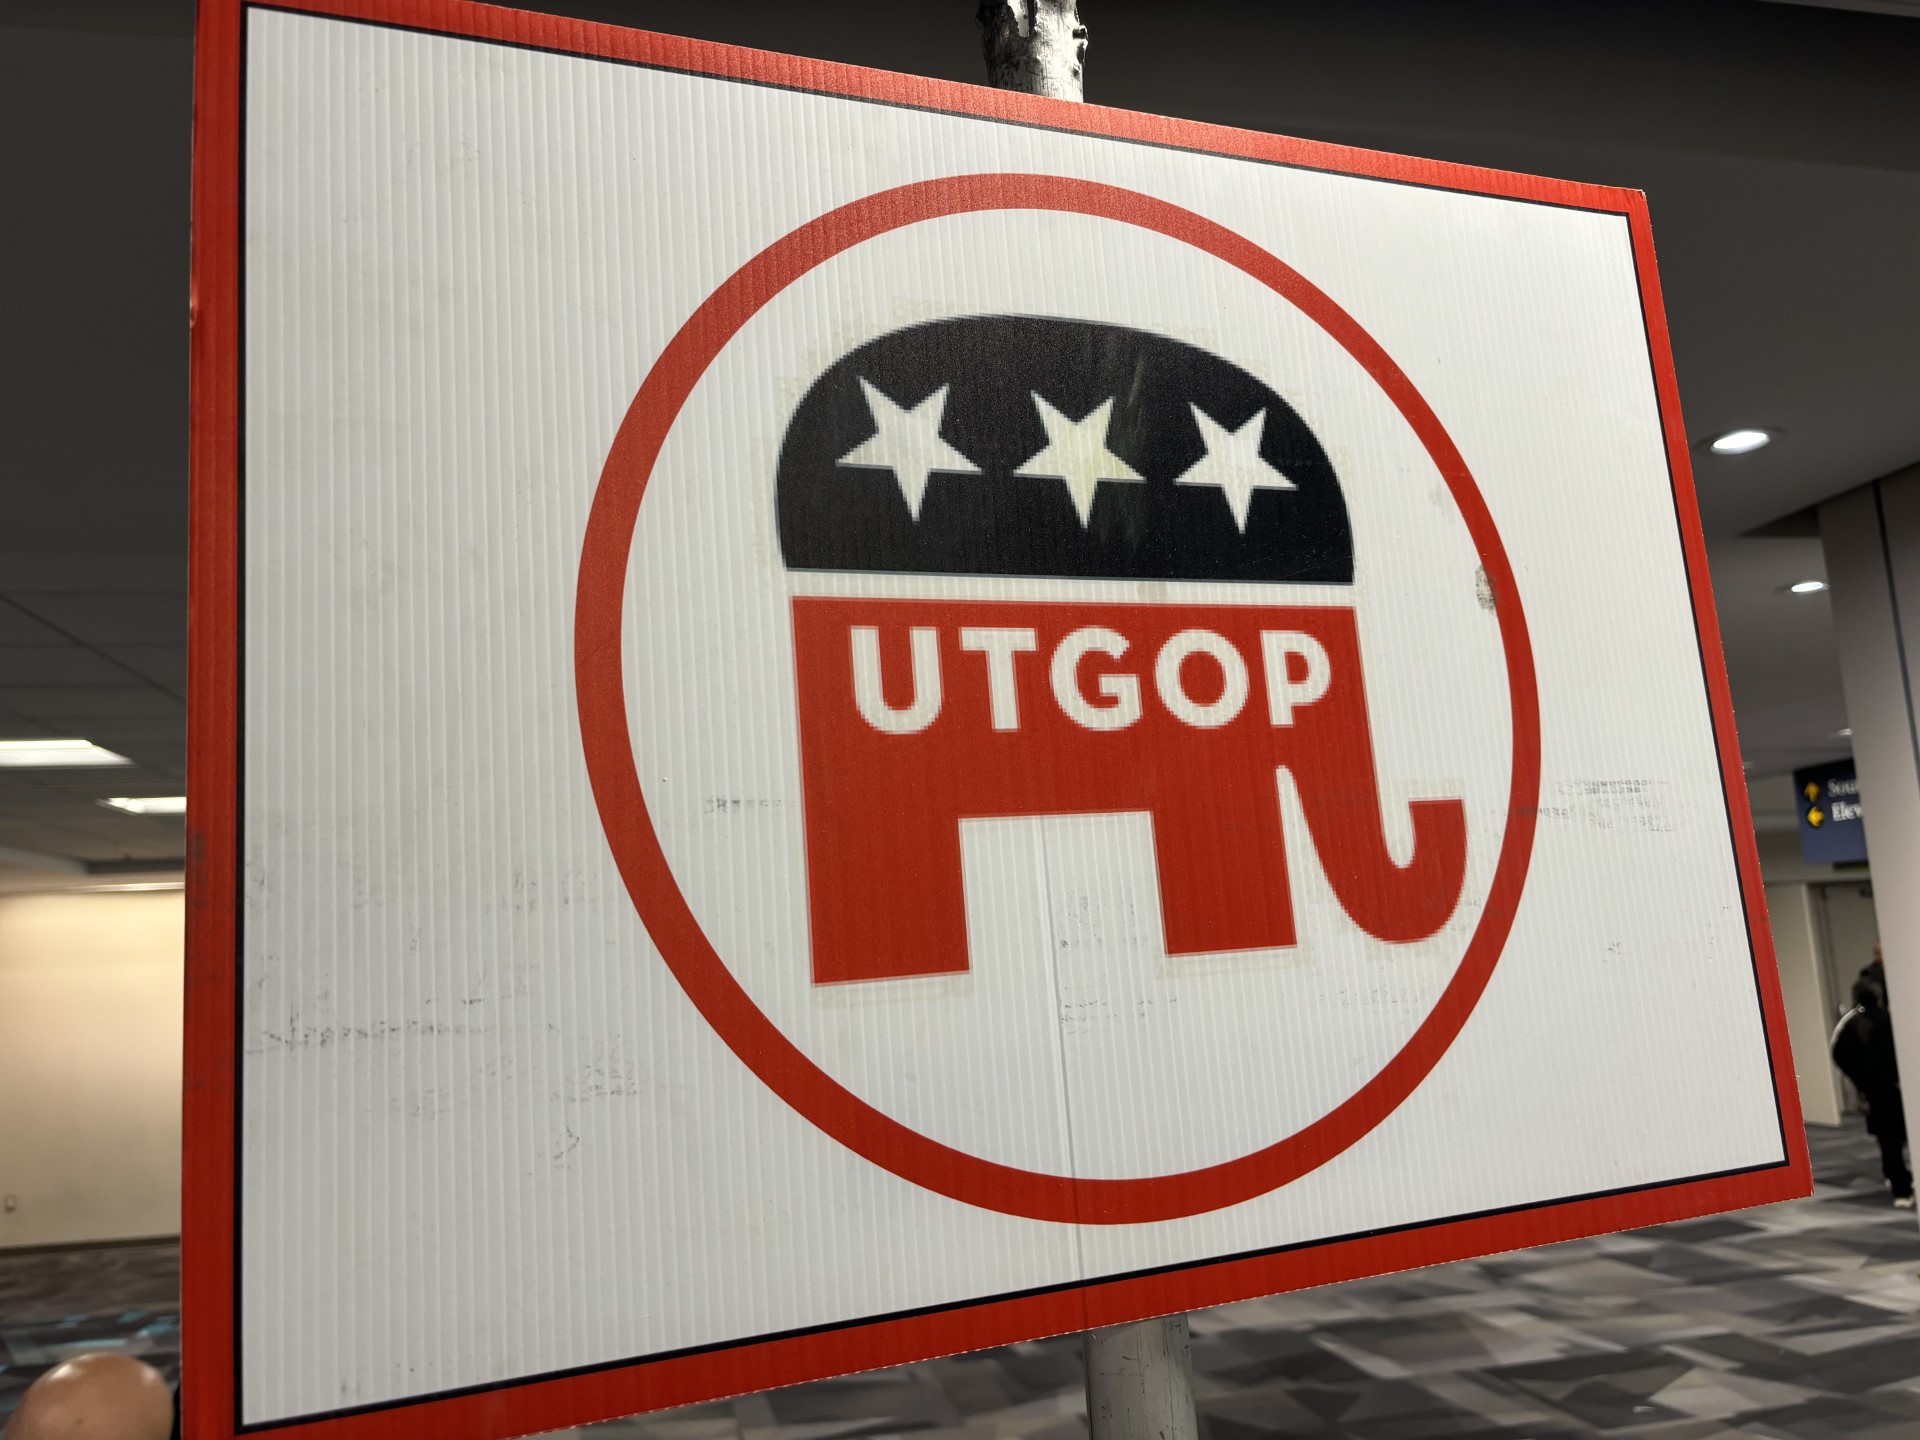 Utah Republican legislative candidates advanced in several races during the state GOP convention Sa...